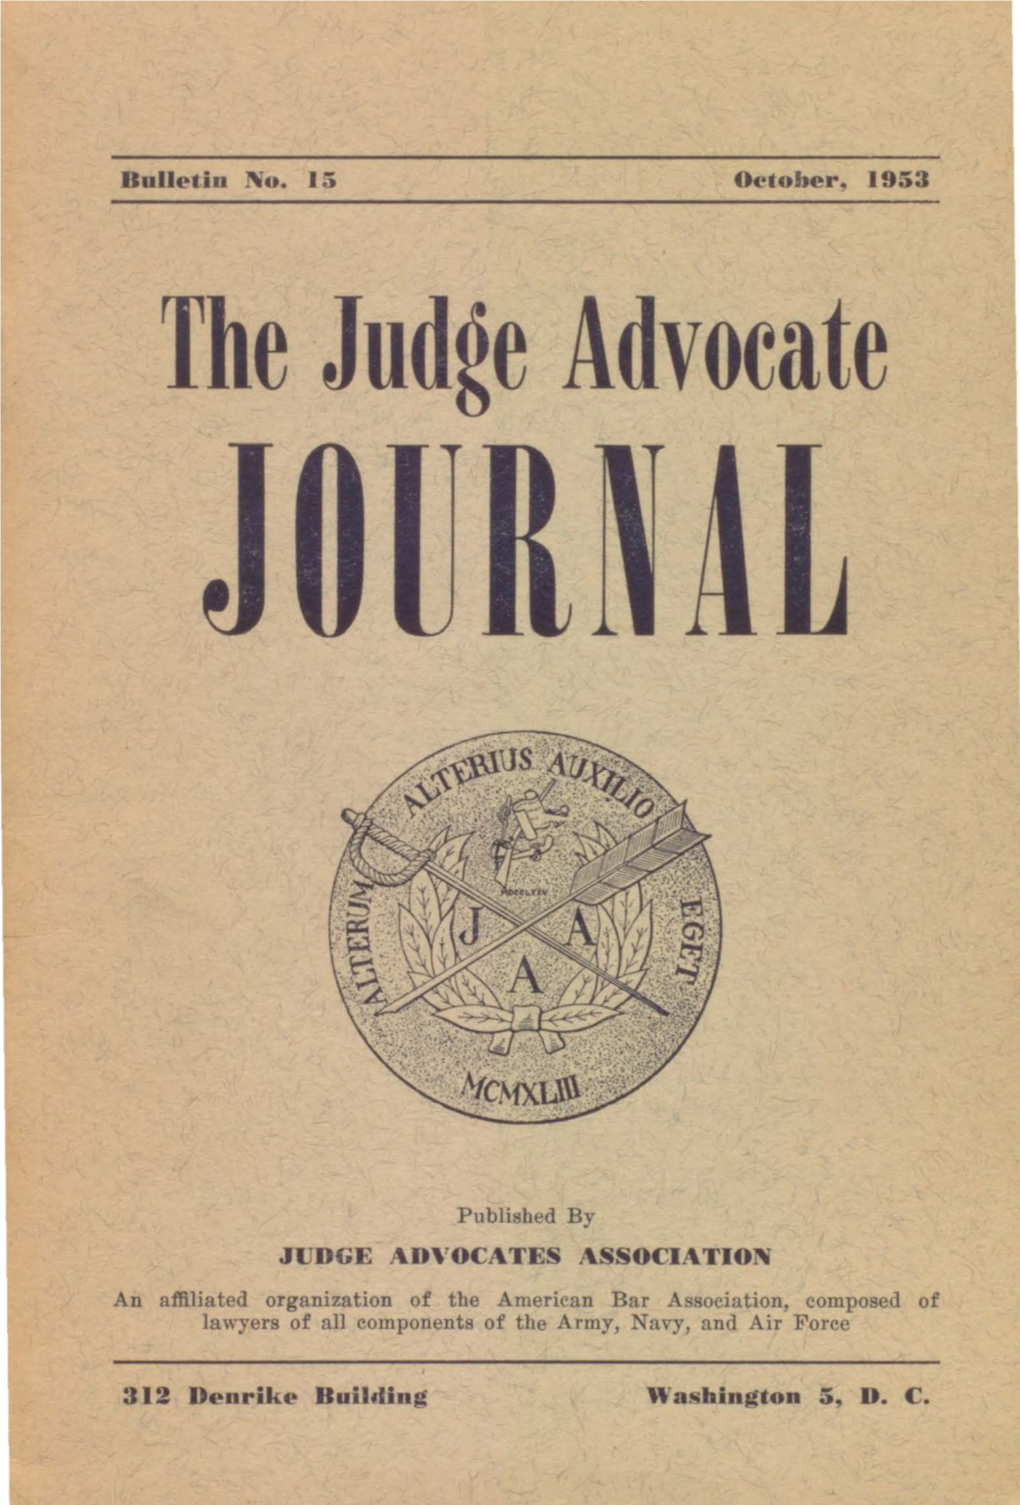 The Judge Advocate Journal, Bulletin No. 15, October, 1953